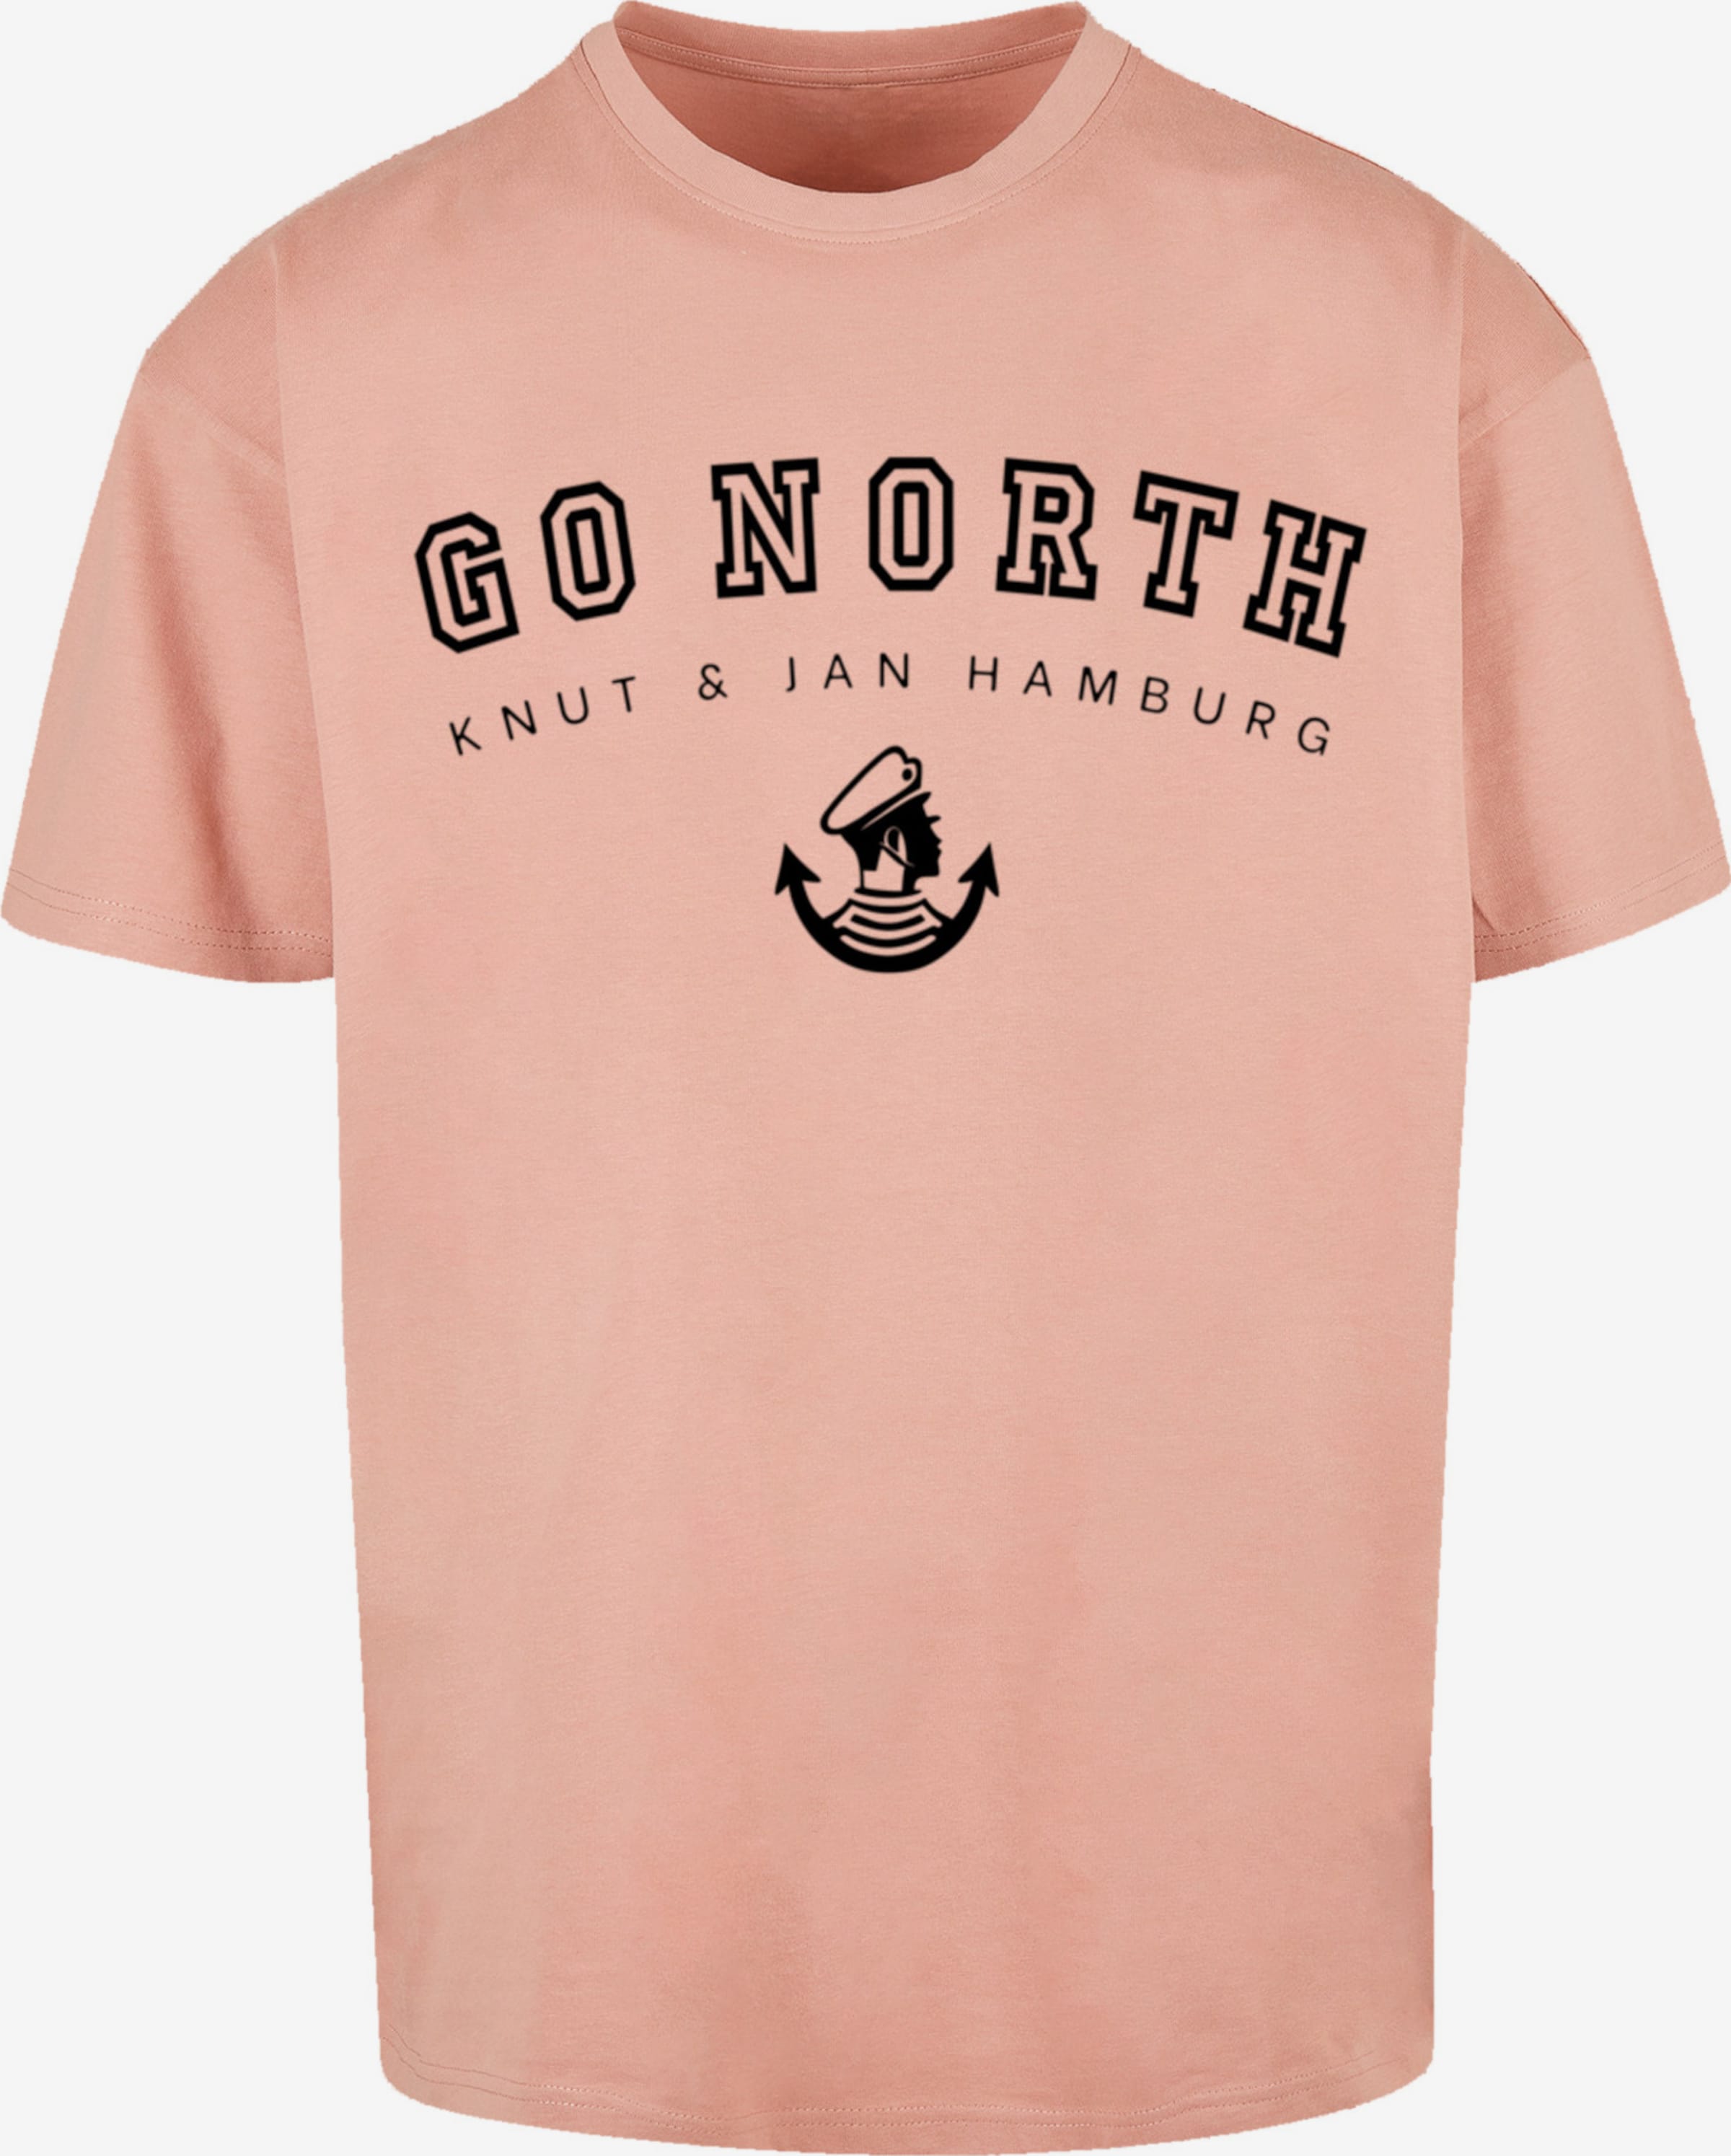 North F4NT4STIC Jan Knut | \'Go Shirt & ABOUT in Hamburg\' YOU Pastellpink